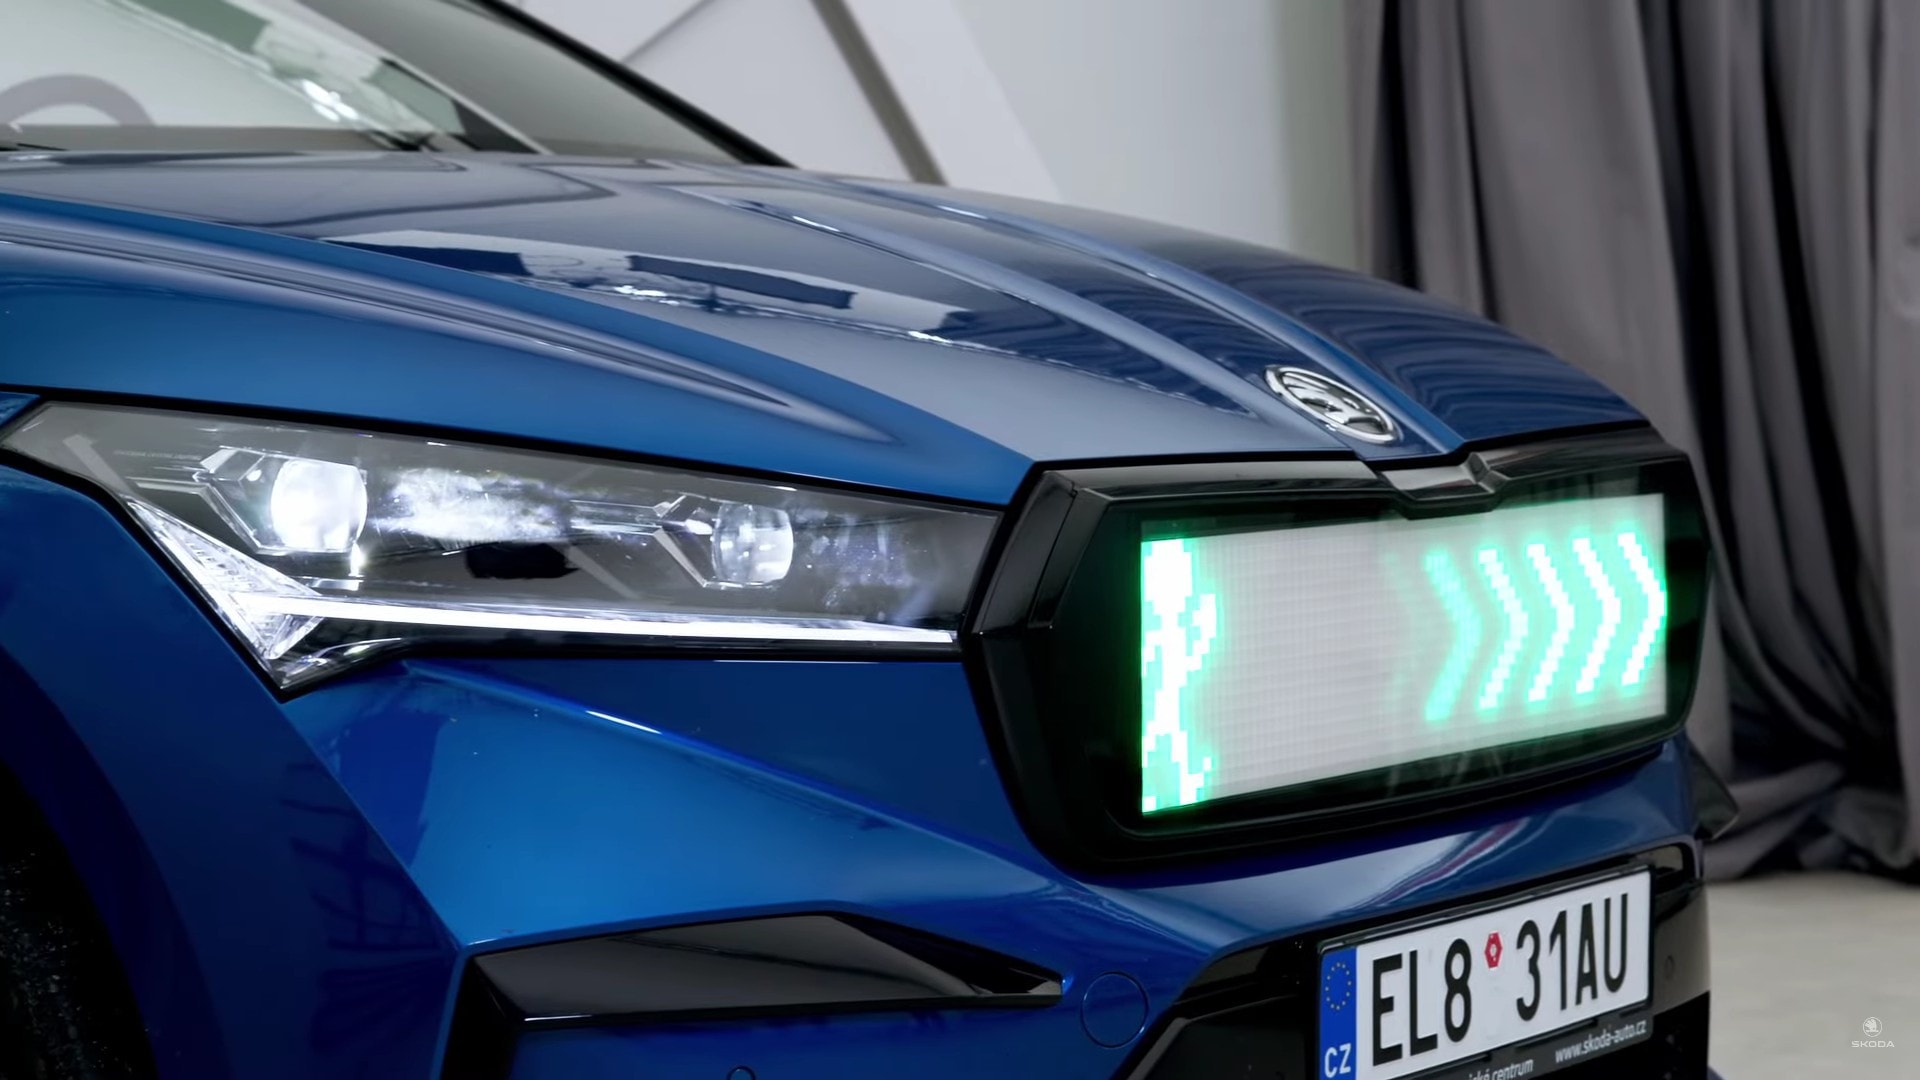 Skoda Tests Grille-Mounted Traffic Lights on Autonomous Cars, How